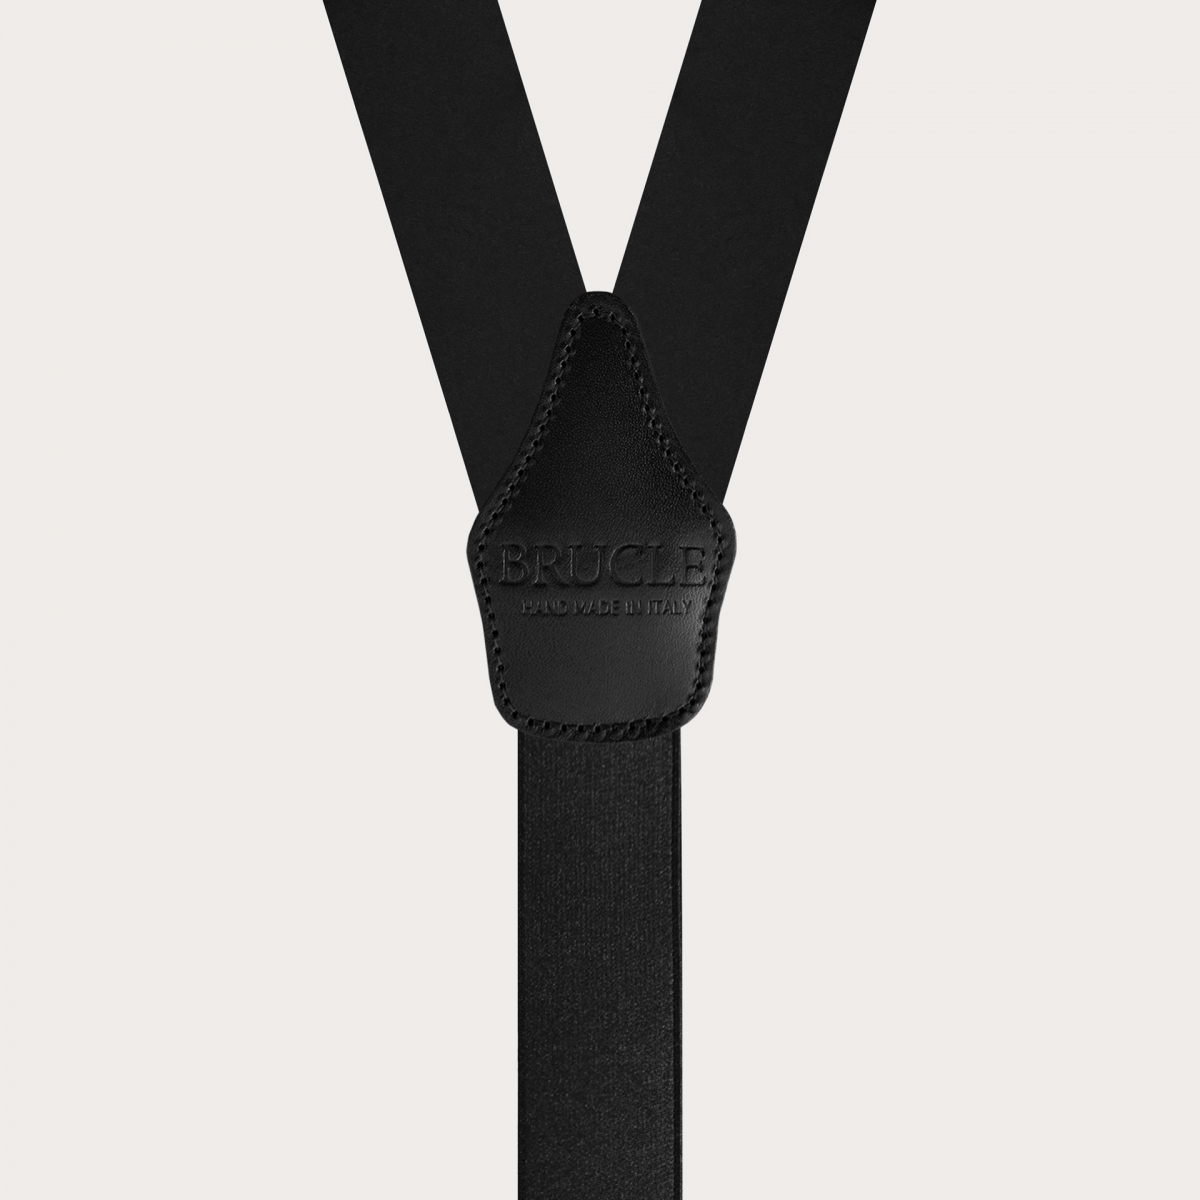 Black silk satin suspenders, dual-use with buttons or gold clips